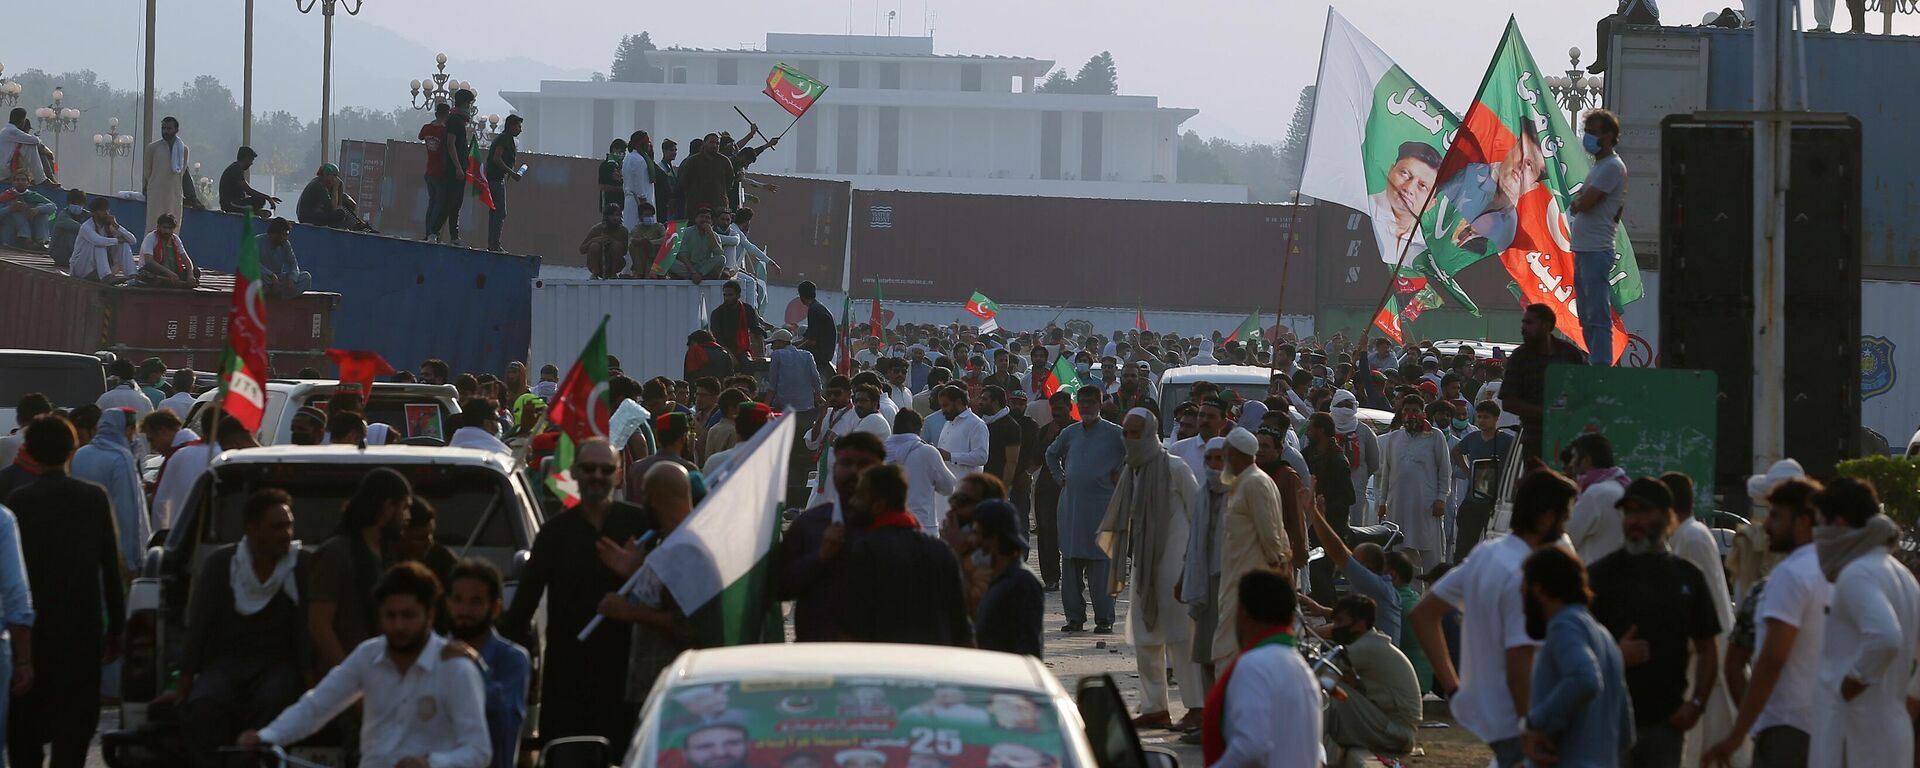 Supporters of Pakistan’s defiant former Prime Minister Imran Khan stand on shipping containers after removing them to open a road during an anti-government rally in Islamabad, Pakistan, Thursday, May 26, 2022. - Sputnik International, 1920, 21.10.2022